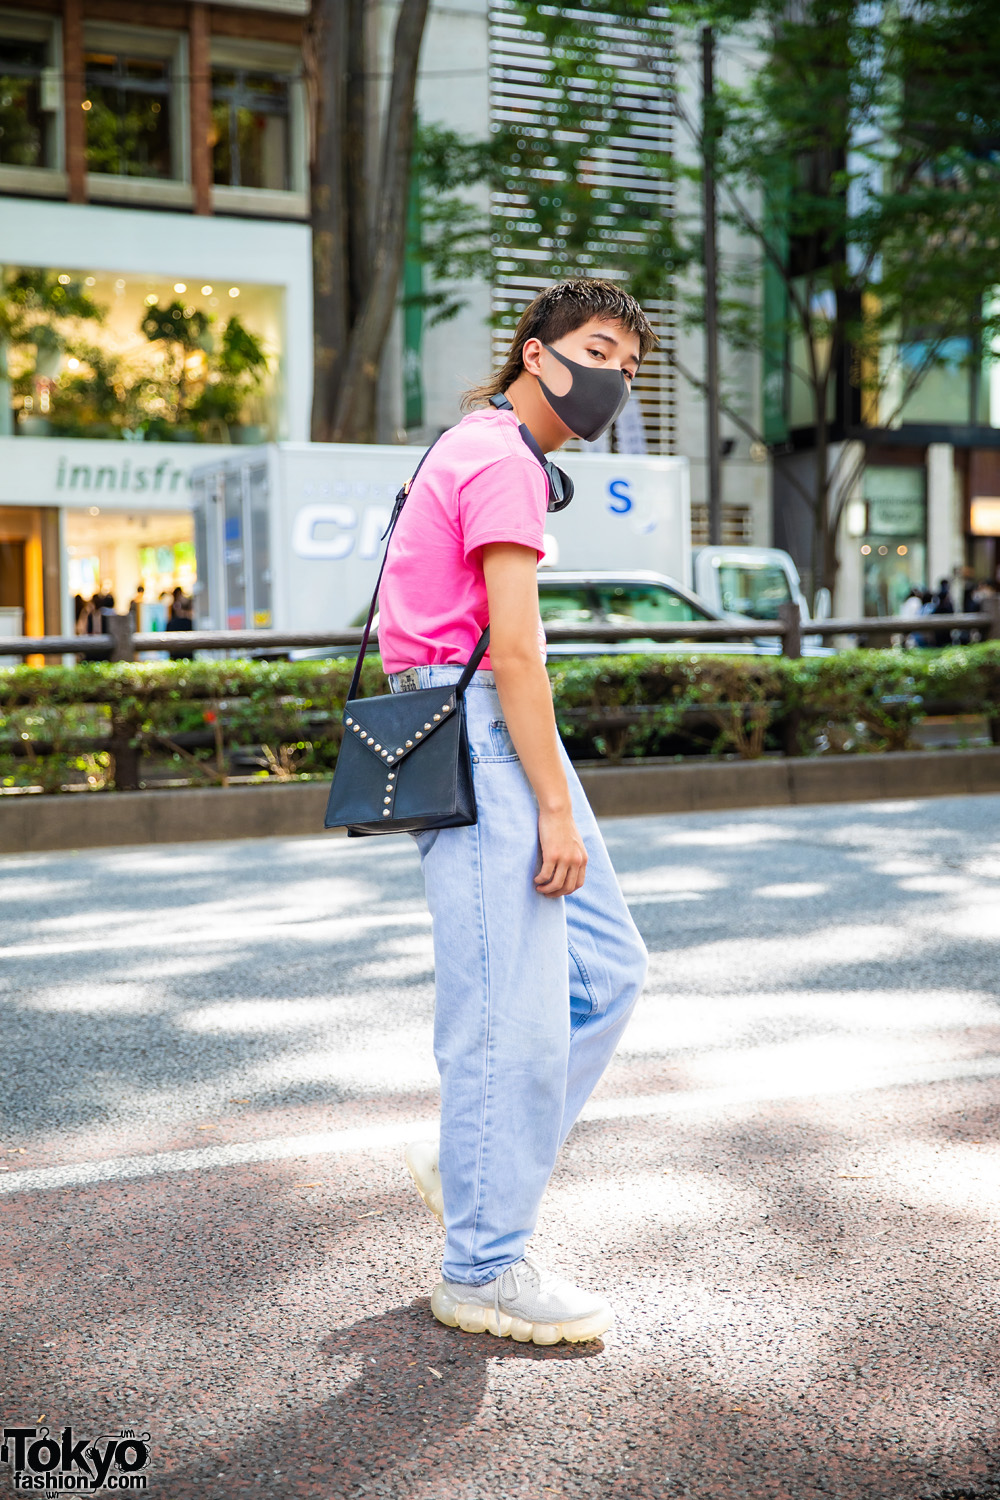 Casual Harajuku Street Style w/ Mullet, Headphones, MYOB NYC Shirt, Levi's Baggy Jeans, YSL Crossbody Bag & Grounds by Mikio Sakabe Jewelry Sneakers